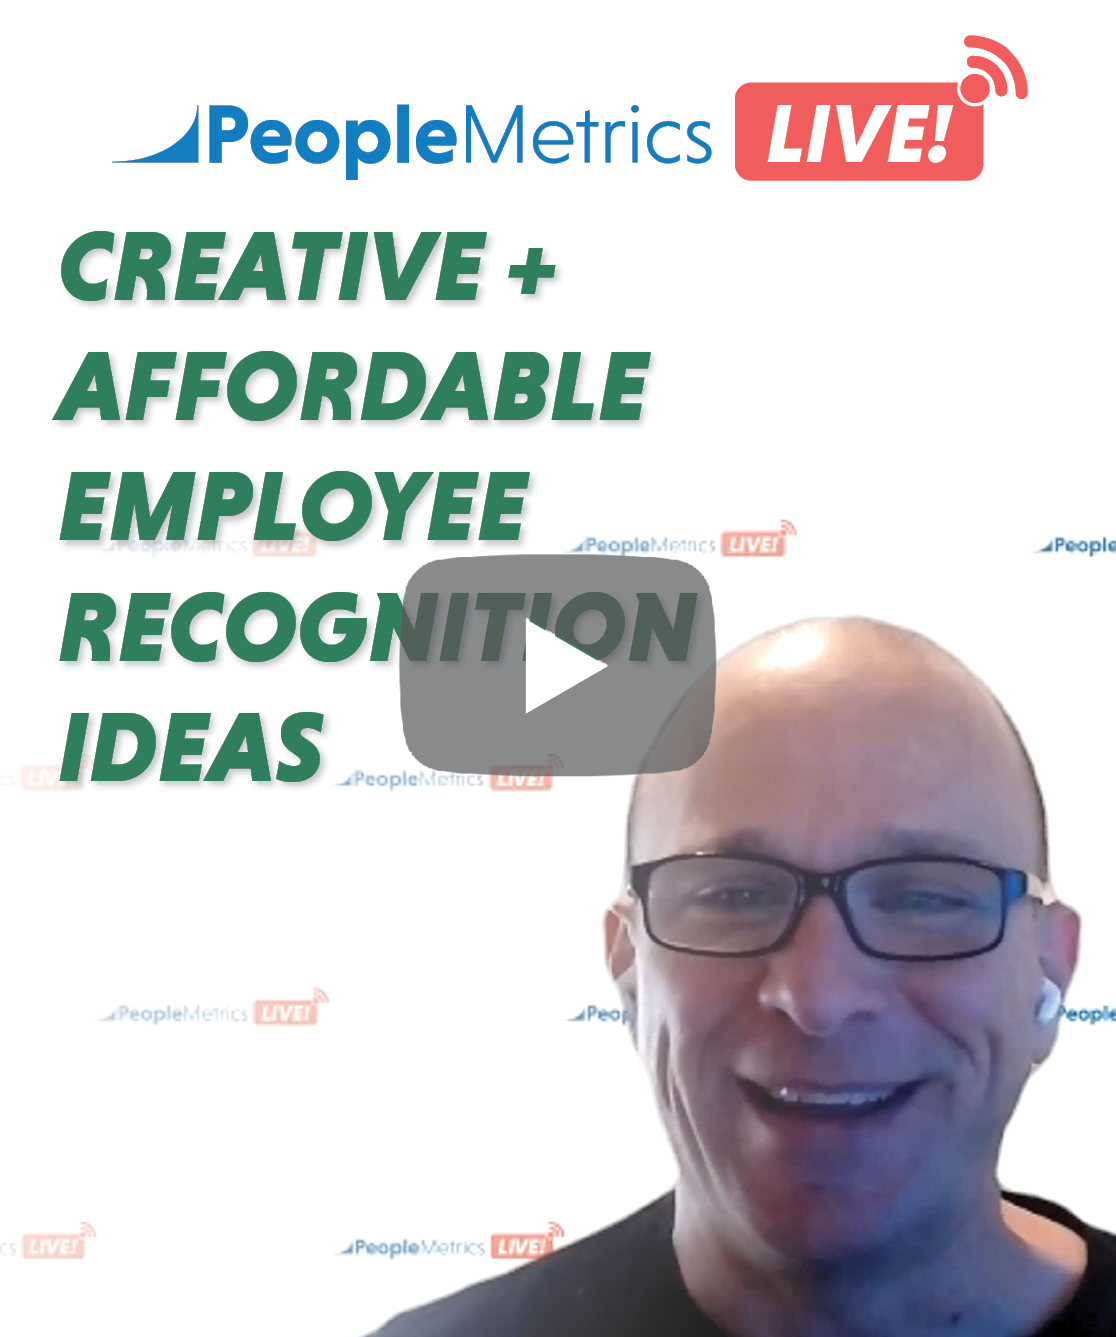 WATCH NOW: How Do You Creatively (and Affordably) Recognize Employees in 2020? | PeopleMetrics LIVE!